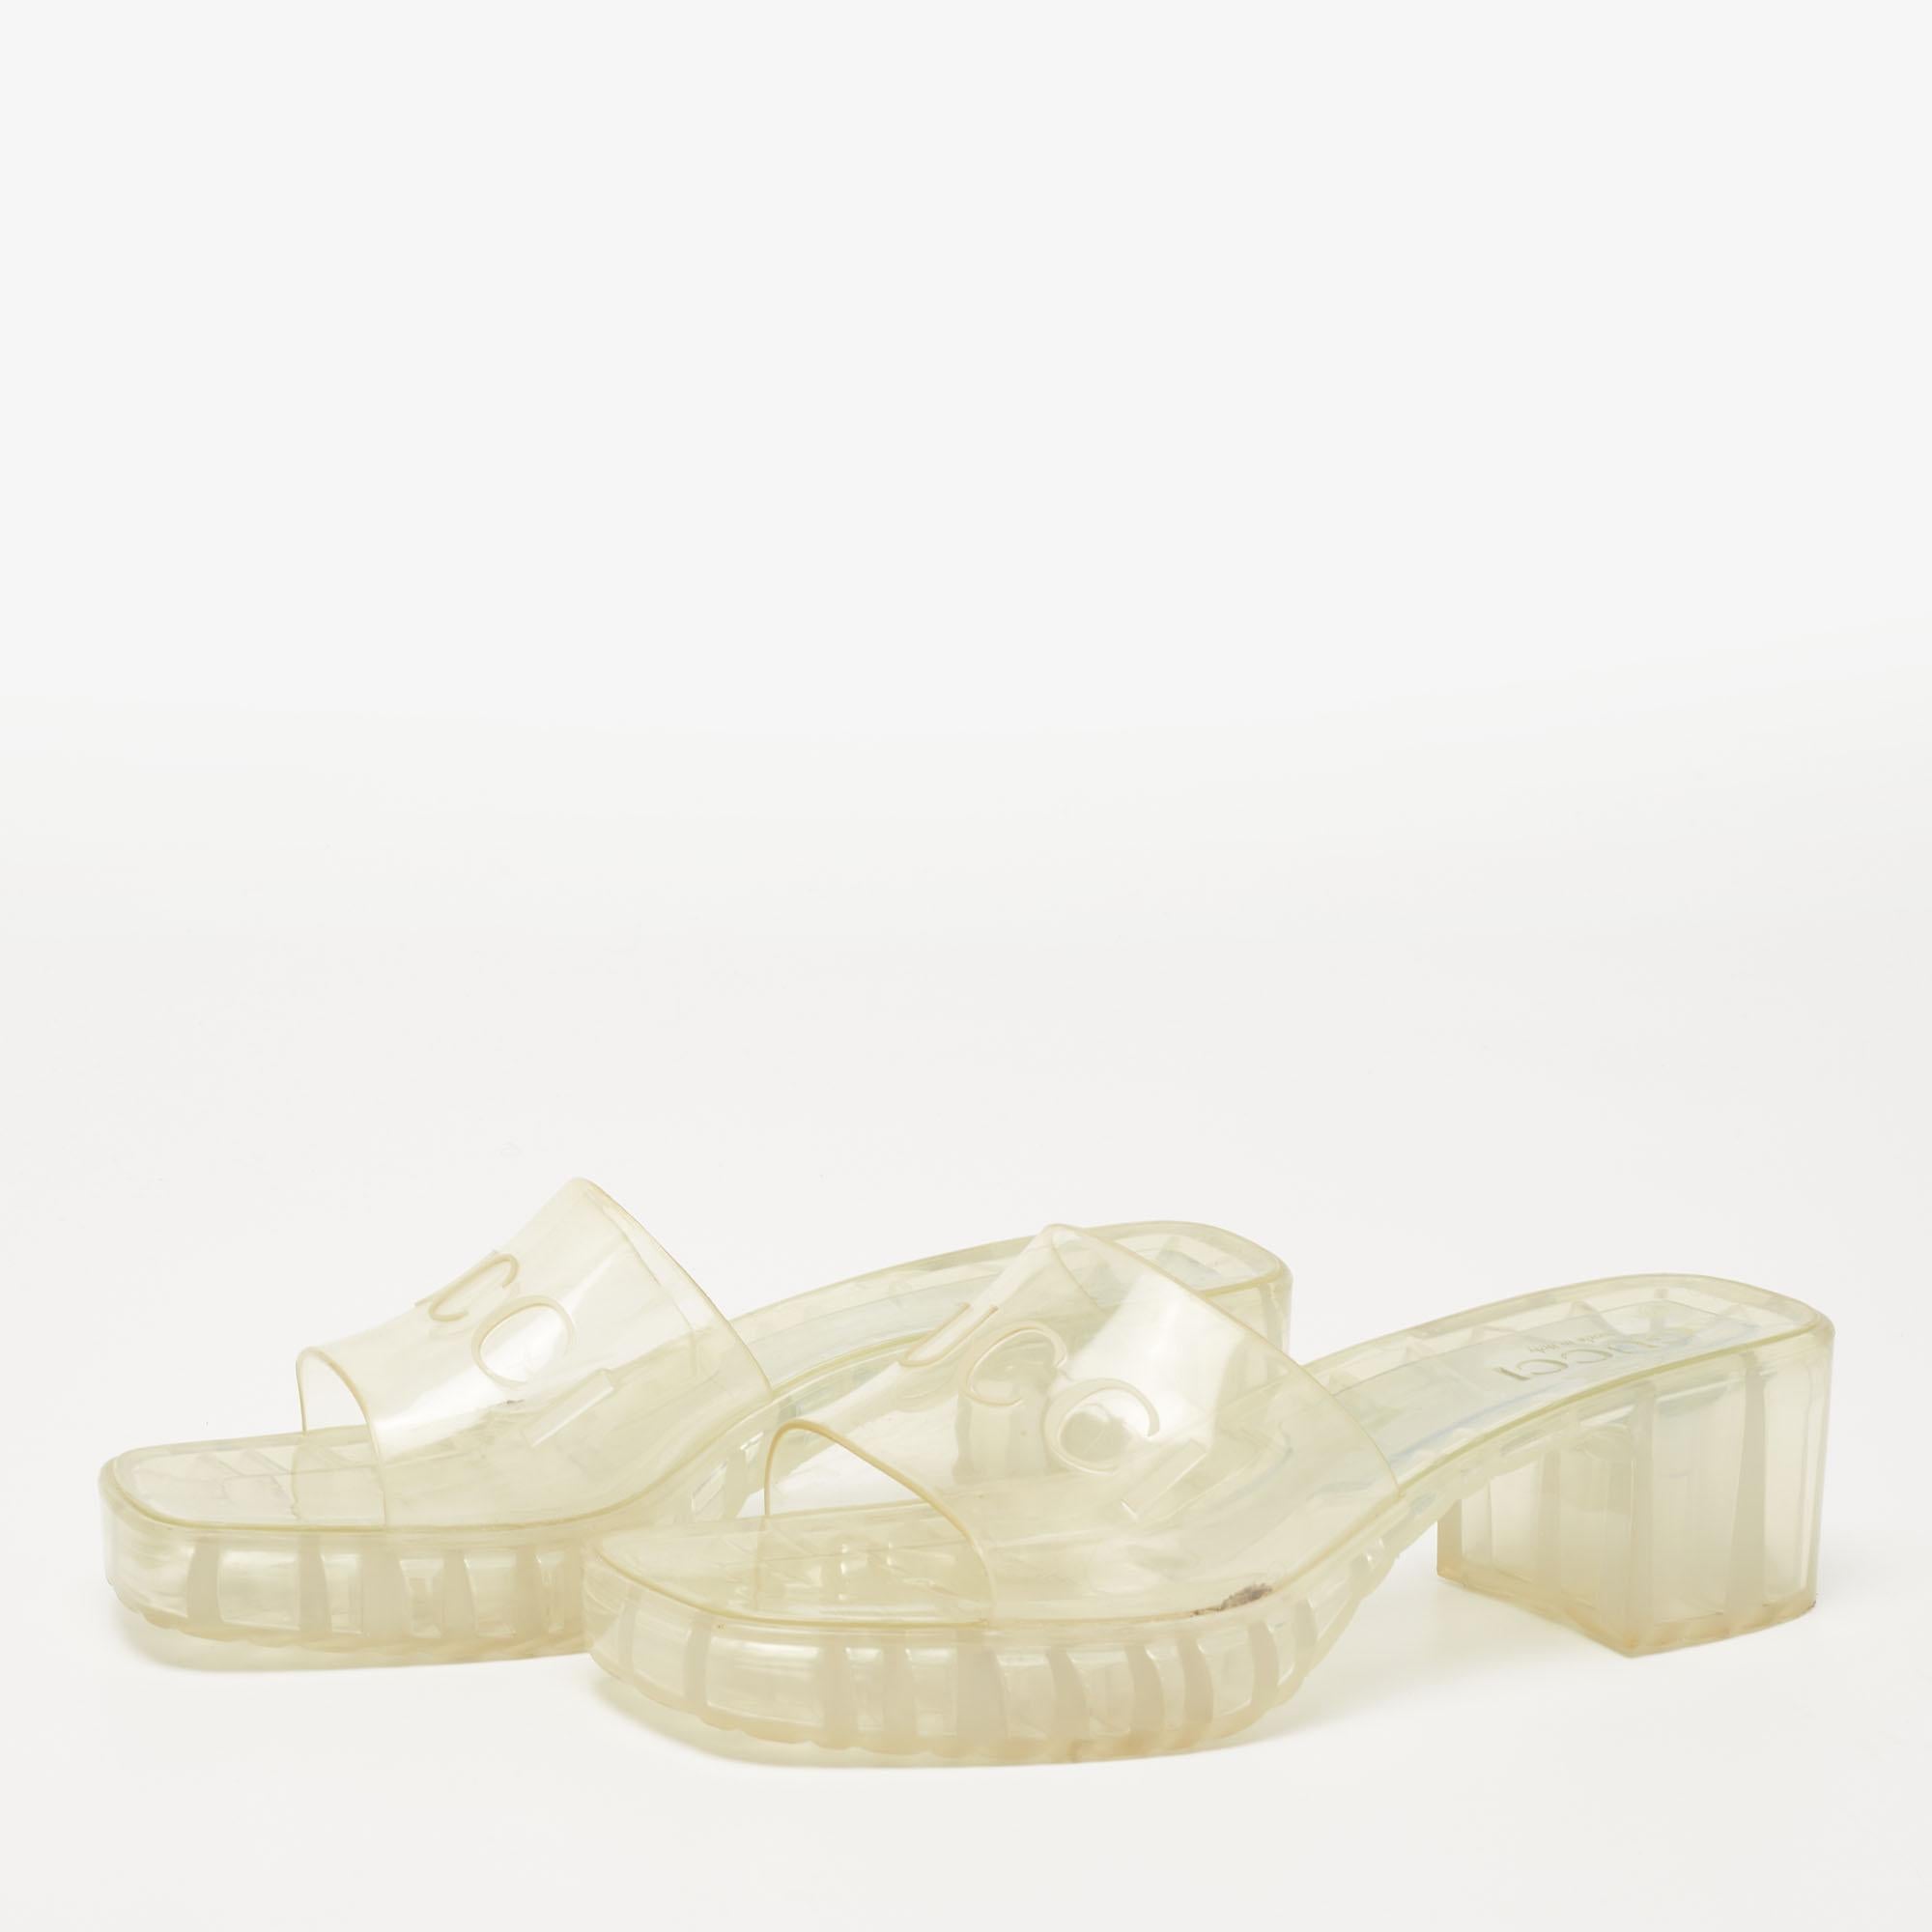 Made in Italy, these fun Gucci slides are a playful take on a staple style. Crafted from rubber, the slides feature the embossed Gucci logo, open toes, and chunky heels. The transparent pair projects a retro appeal along with being water-resistant.